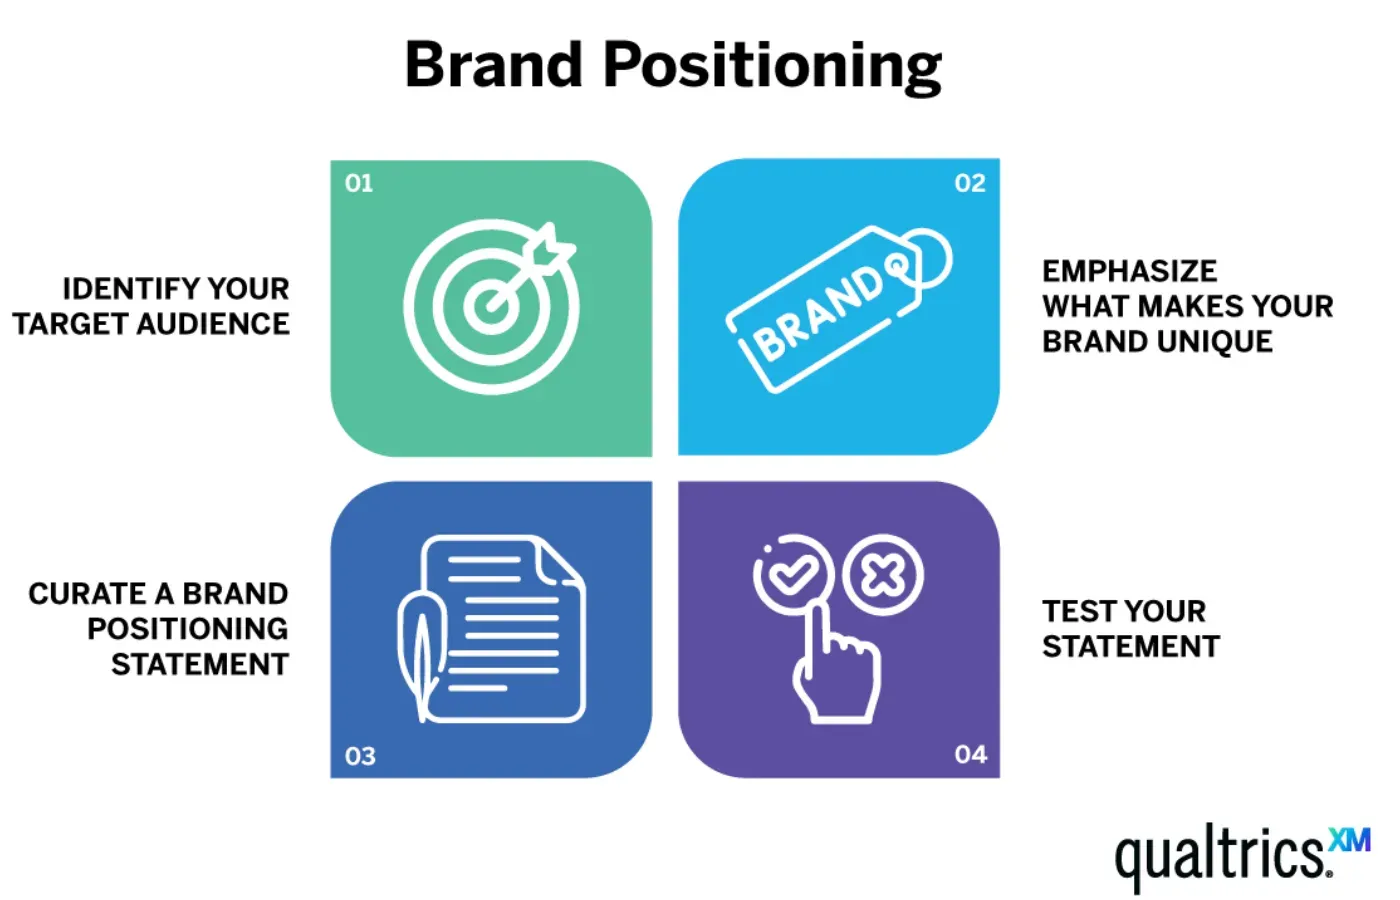 How is Brand Positioning Implemented?